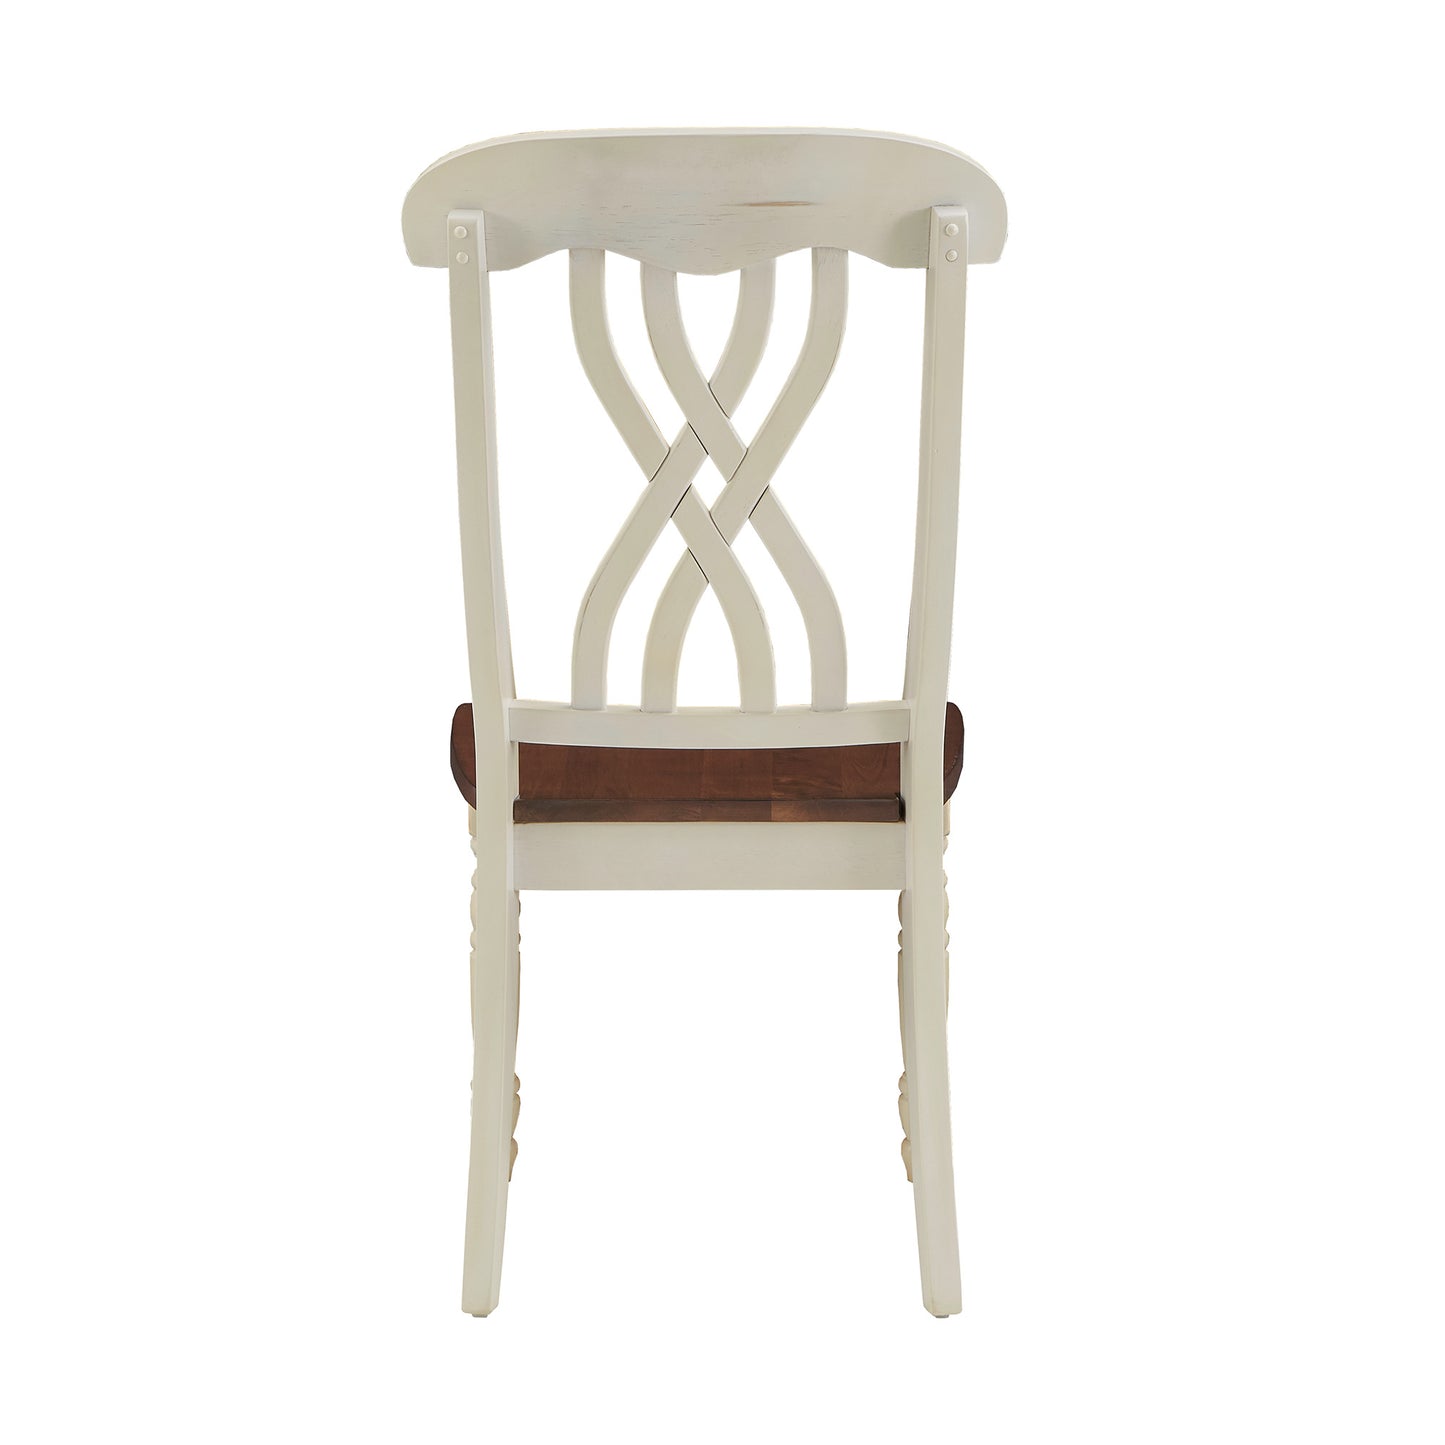 Two-Tone Antique Dining Chairs (Set of 2) - Antique White, Cross Back